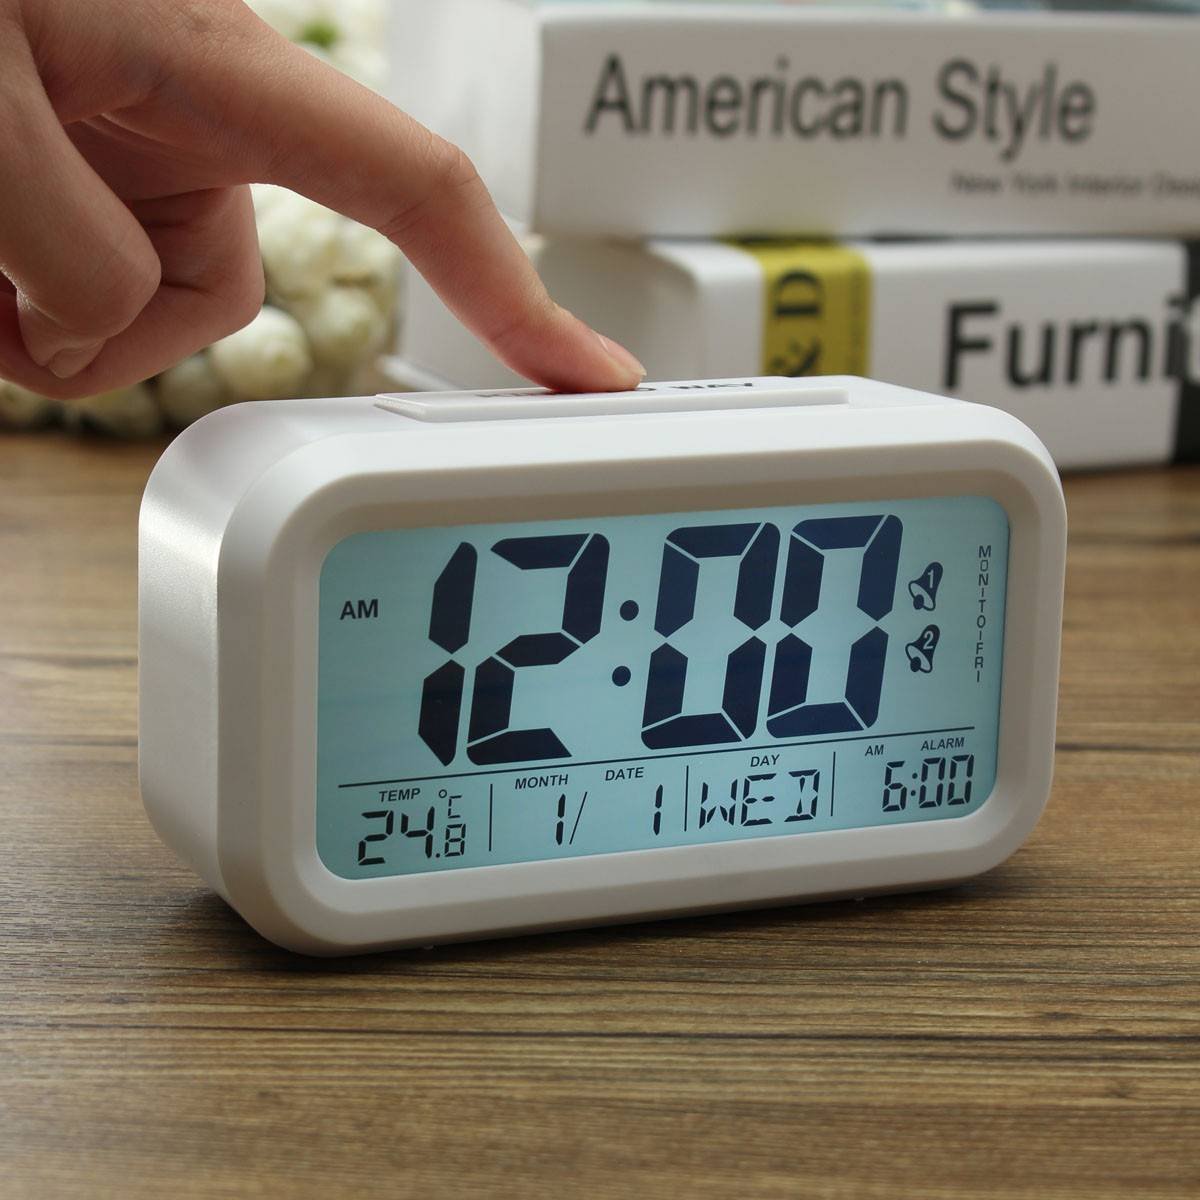 King Do Way Digital Alarm Clock Battery Operated With Dual Alarm Snooze And Large Display